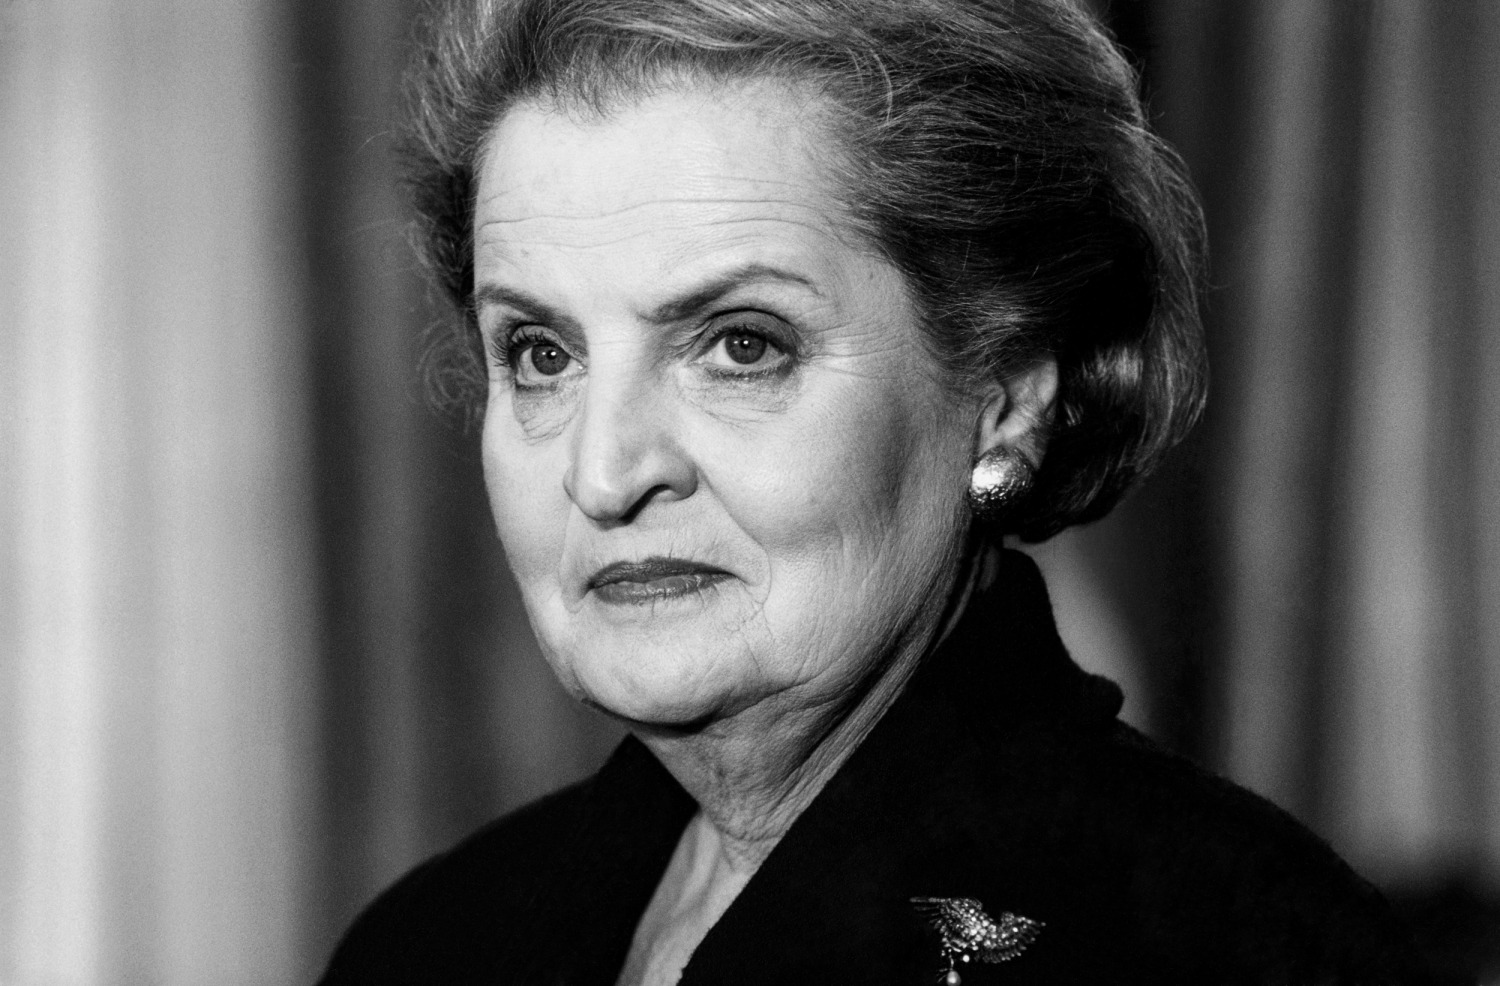 Madeleine Albright is remembered as diplomat and teacher